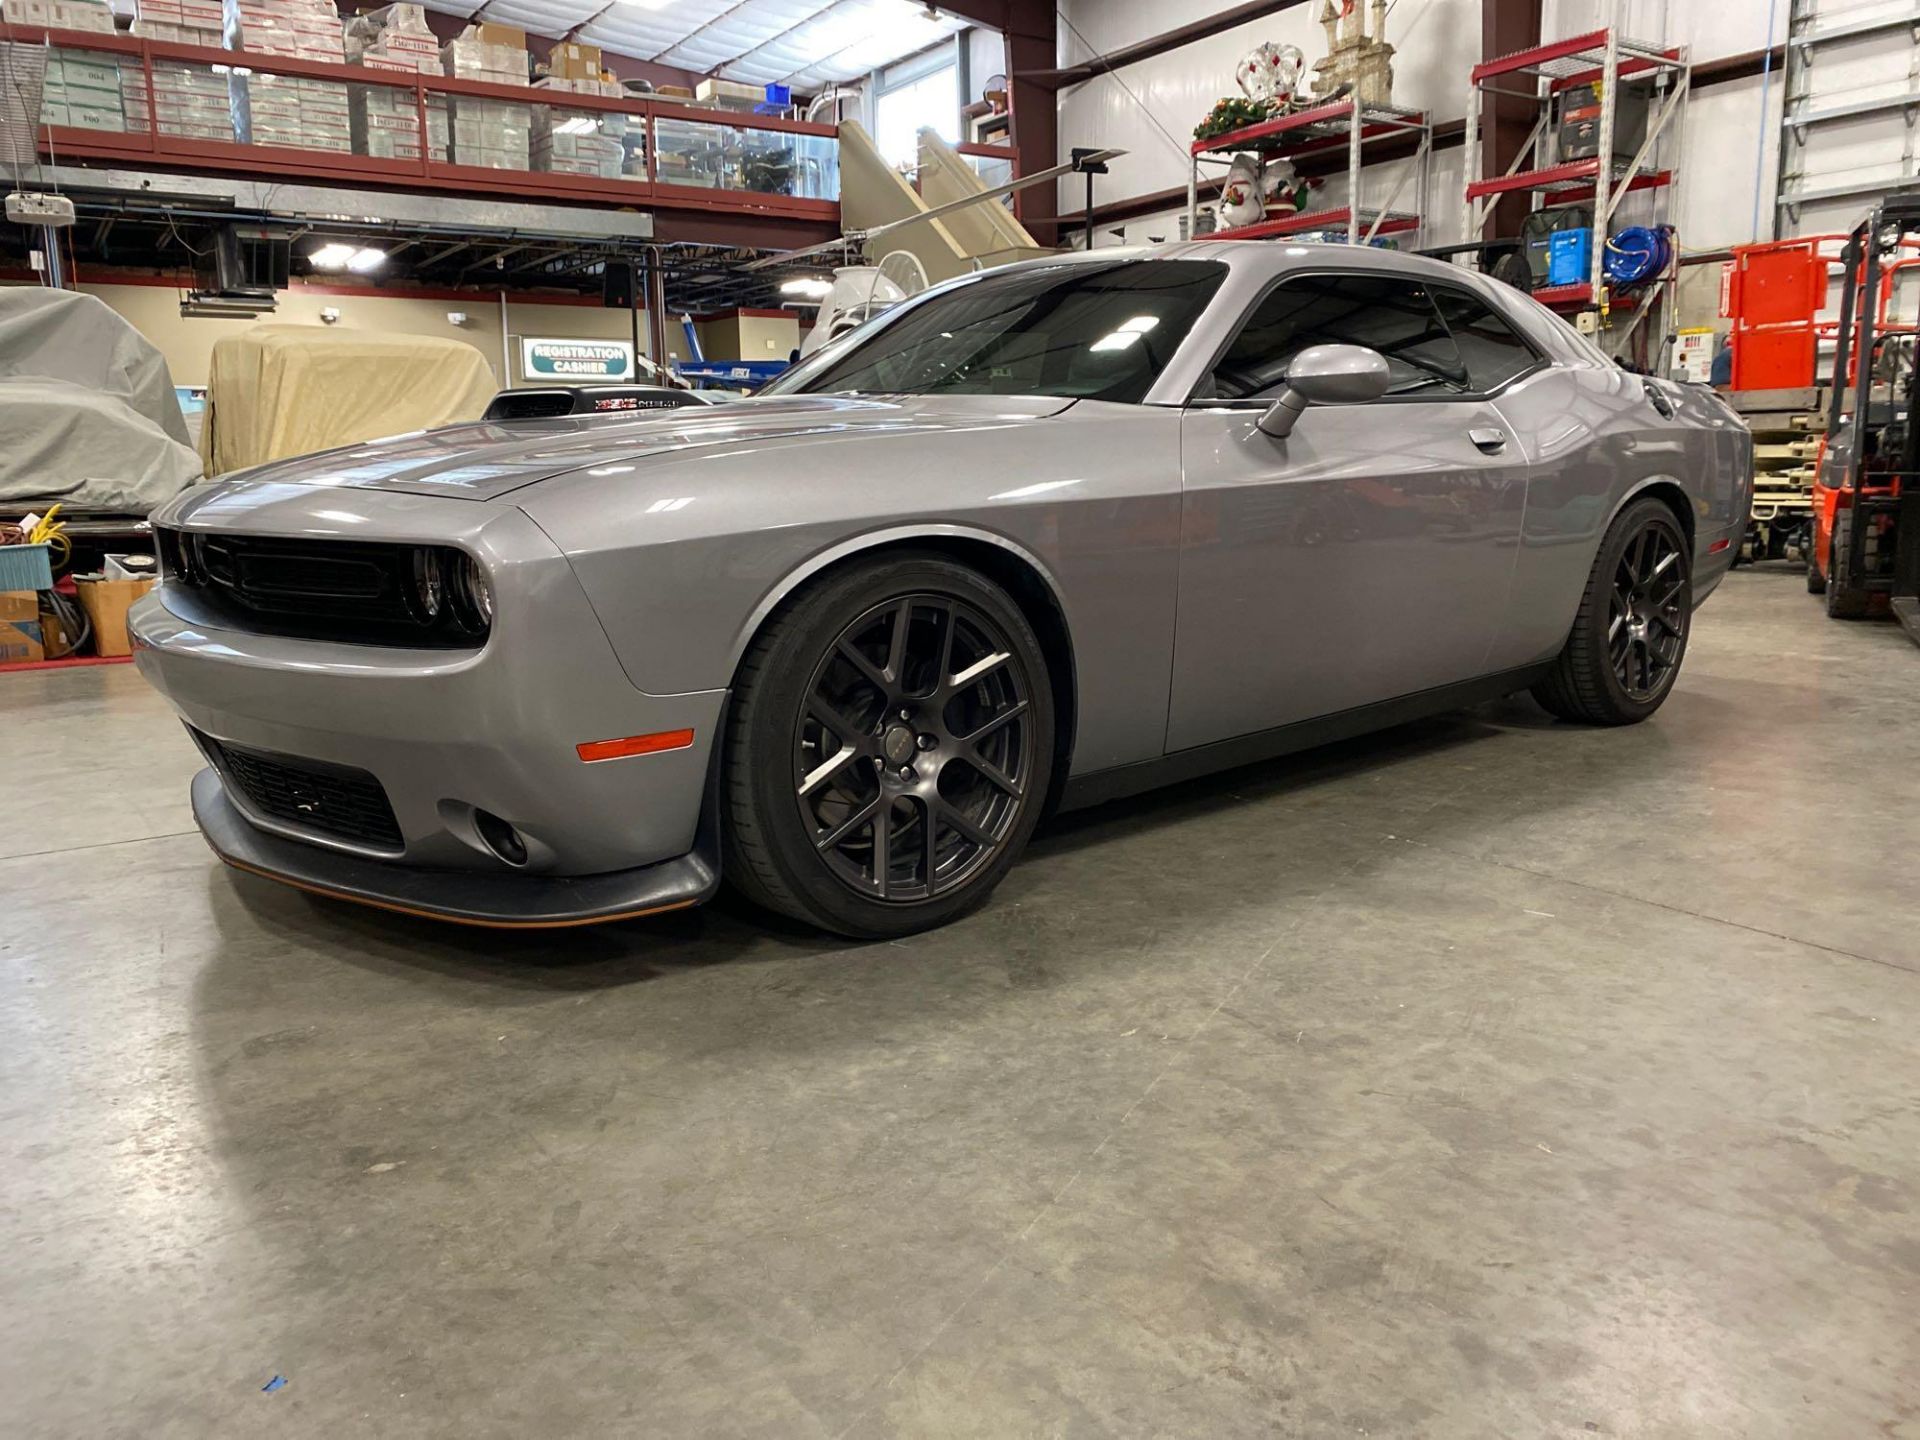 2016 DODGE CHALLENGER WITH SCAT PACK/ SHAKER PACKAGE, APPROX 9,850 MILES SHOWING, RUNS AND OPERATES